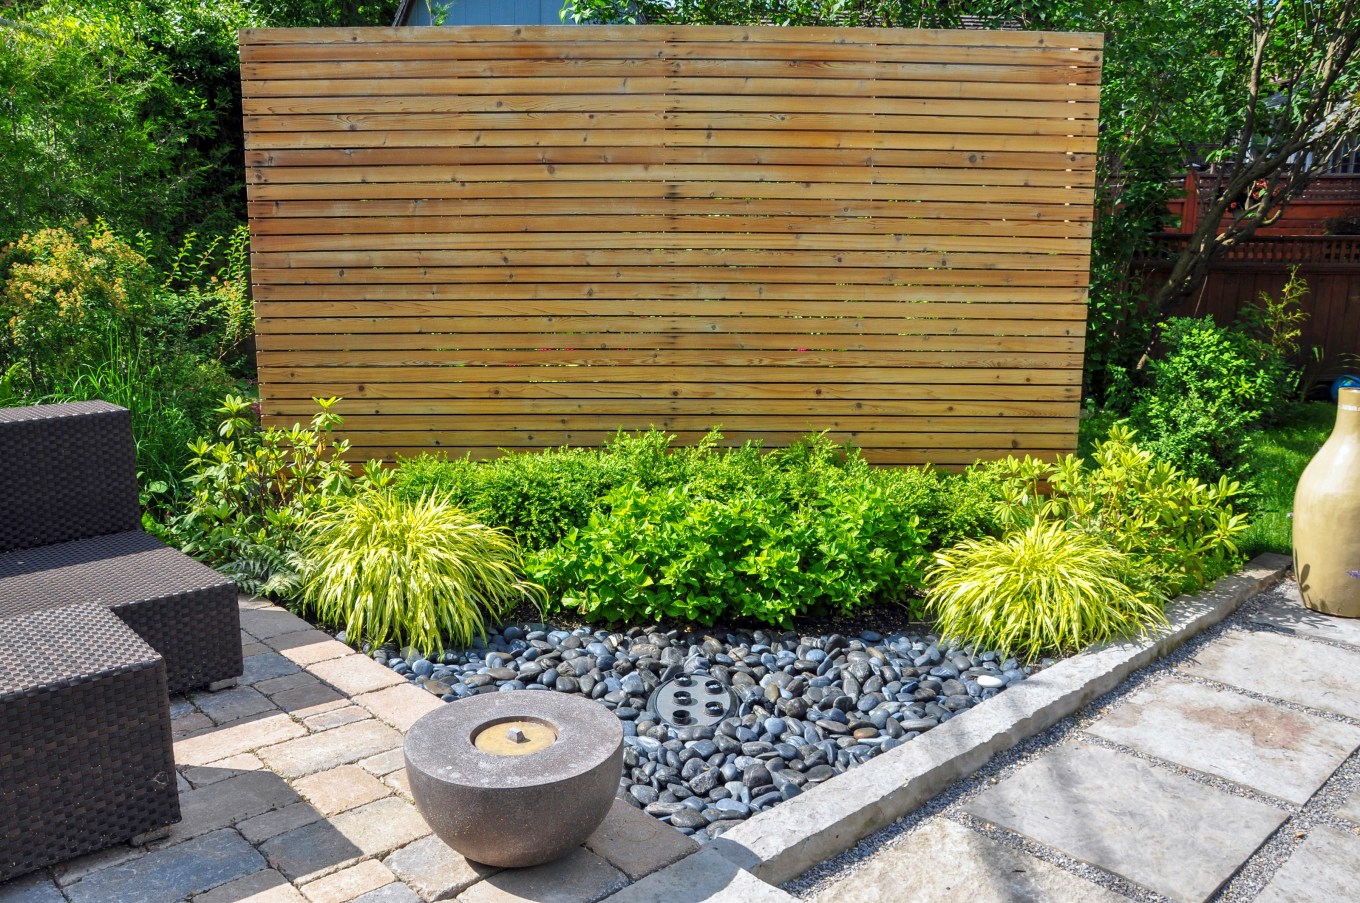 A slatted wooden wall hides the neighbor's from view. Beach pebbles, square cut flagstone and brick landscape pavers and simple plantings provide ample texture and contrast in this small contemporary backyard Asian inspired urban garden.